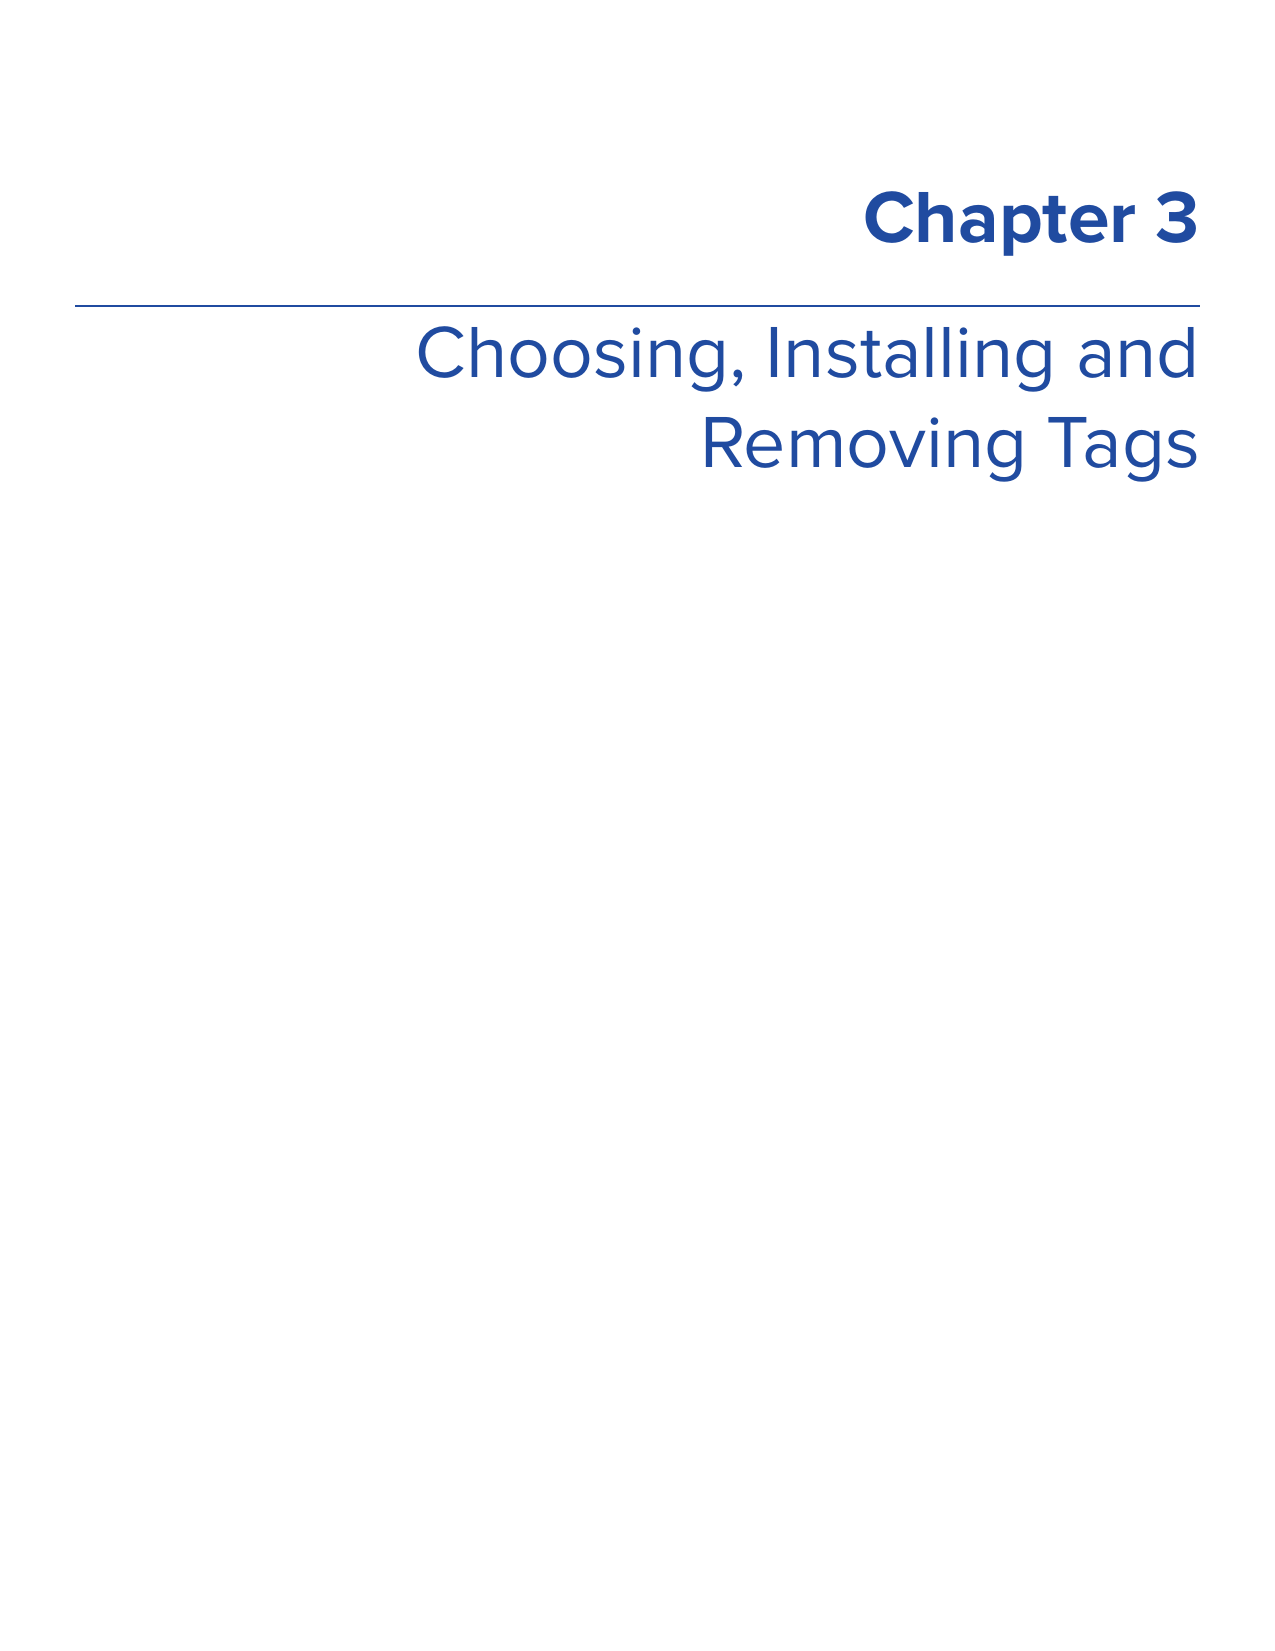 Choosing, Installing and Removing TagsChapter 3